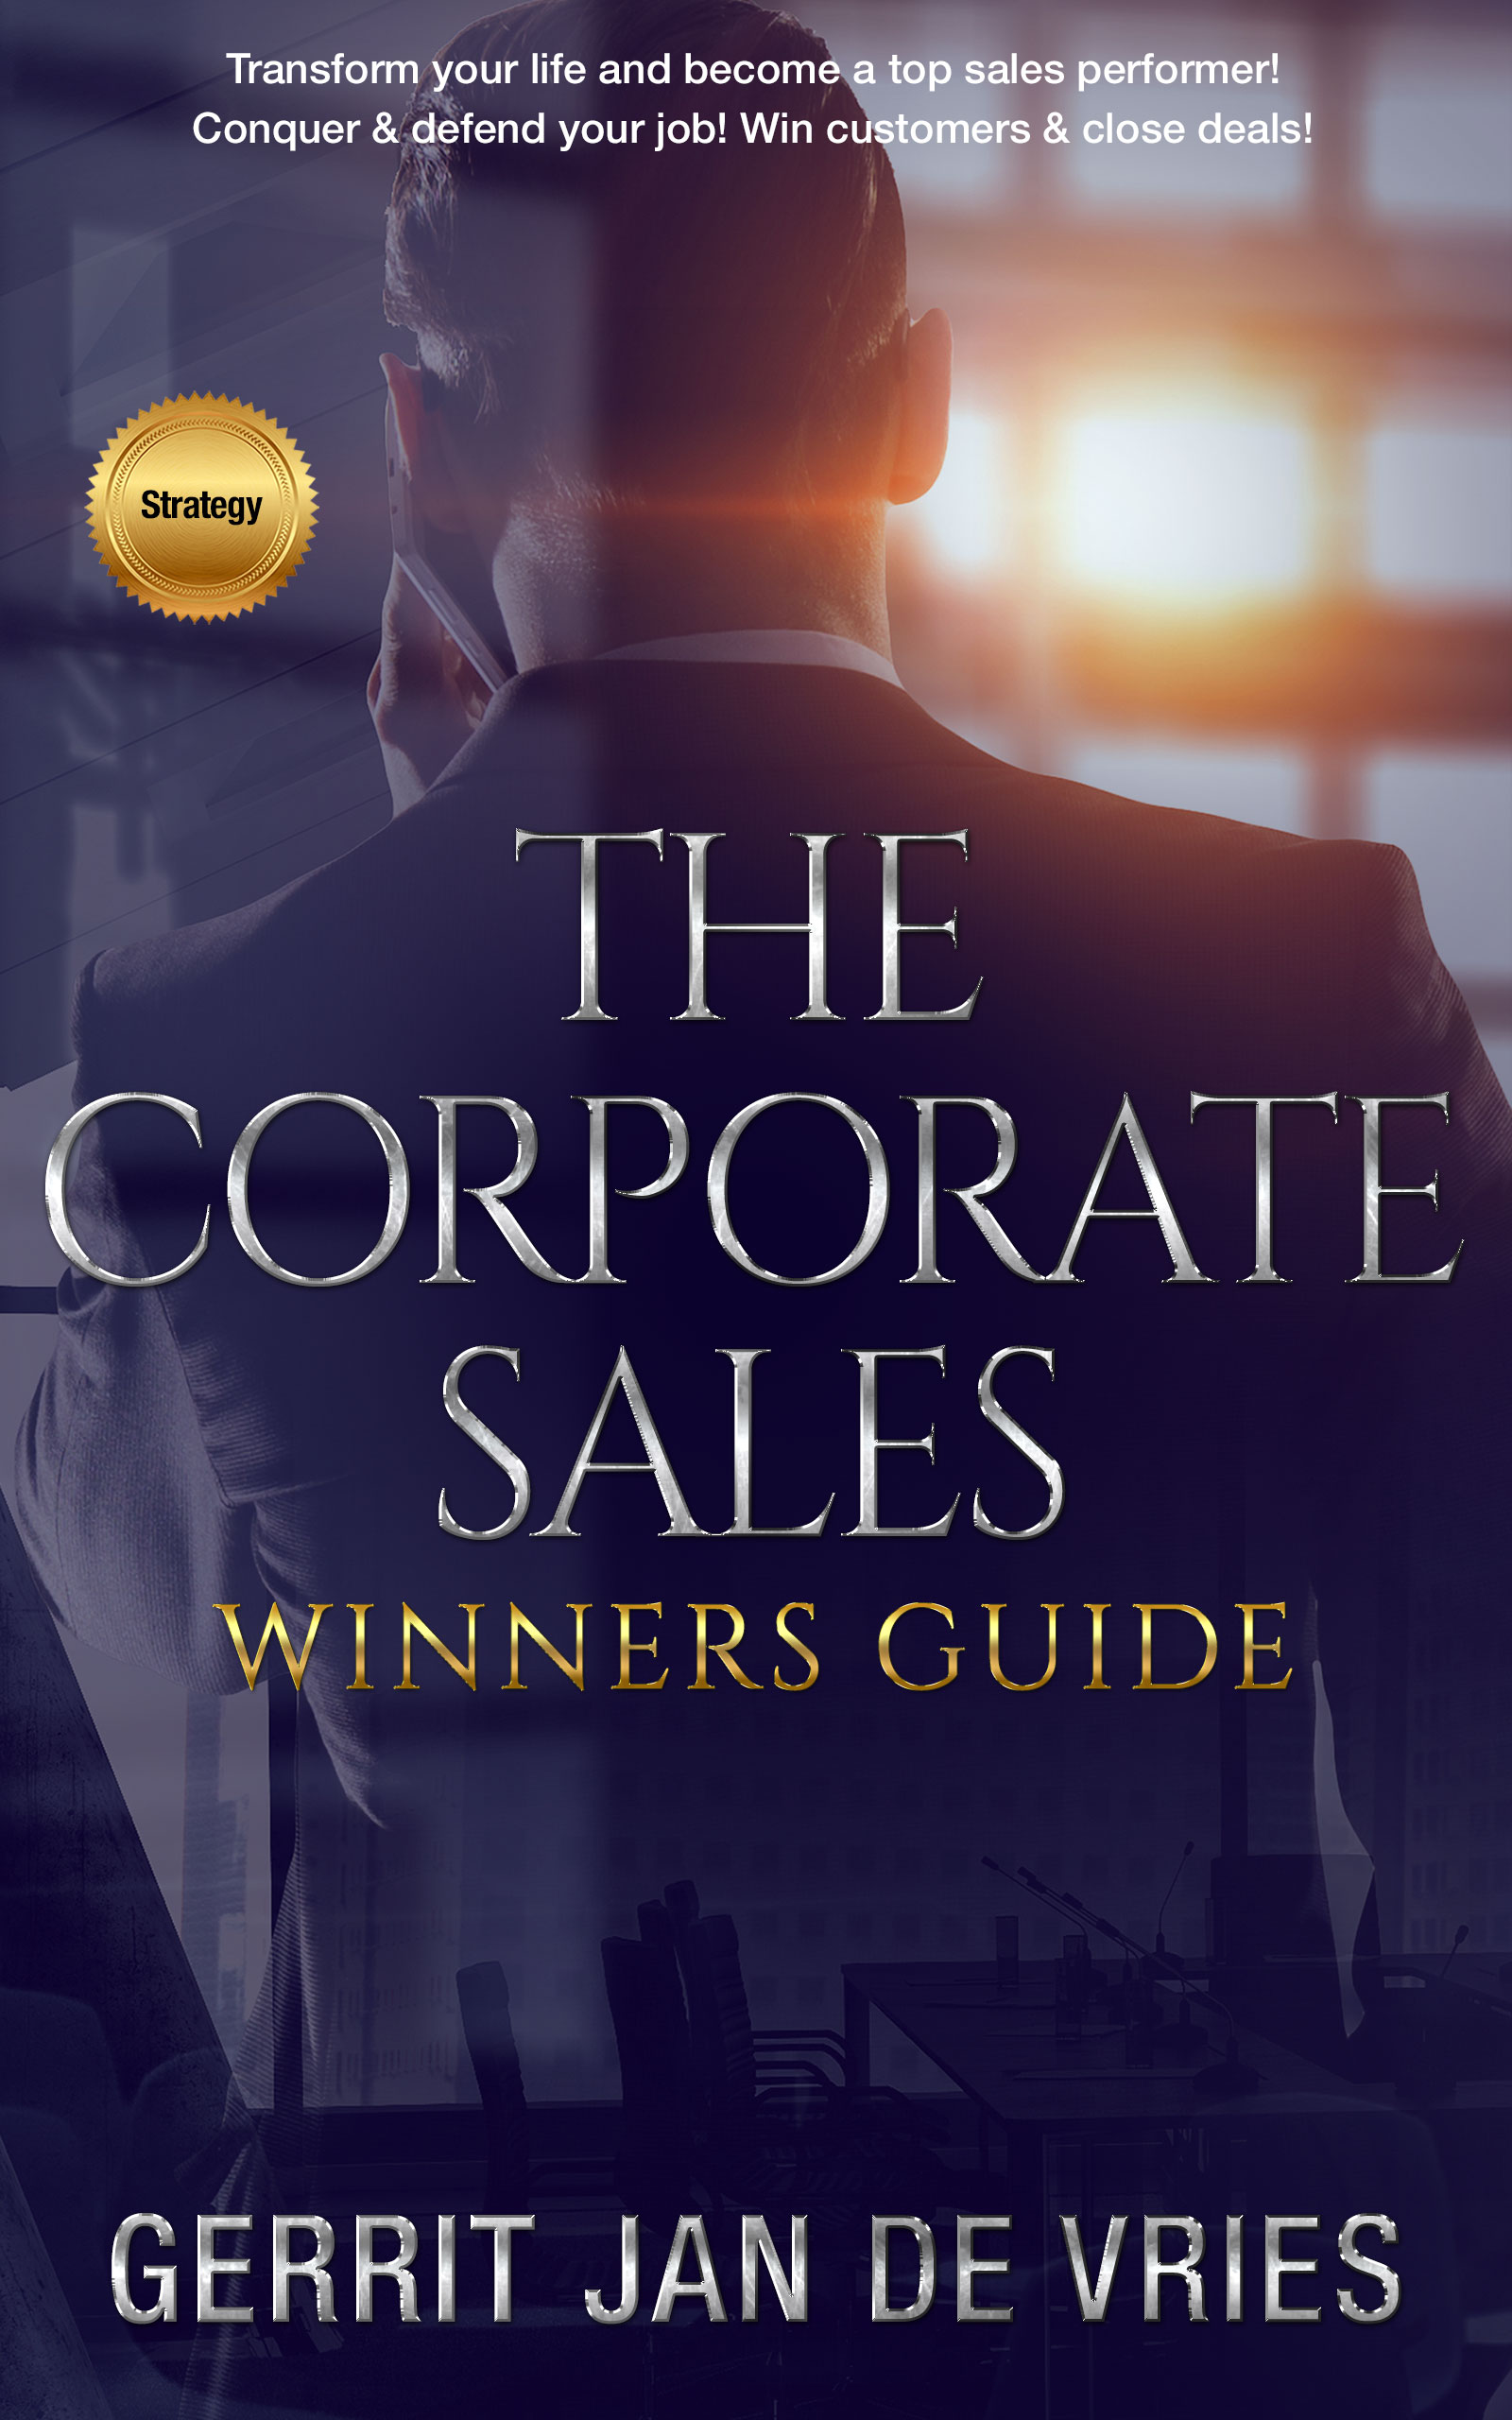 The corporate sales winners guide